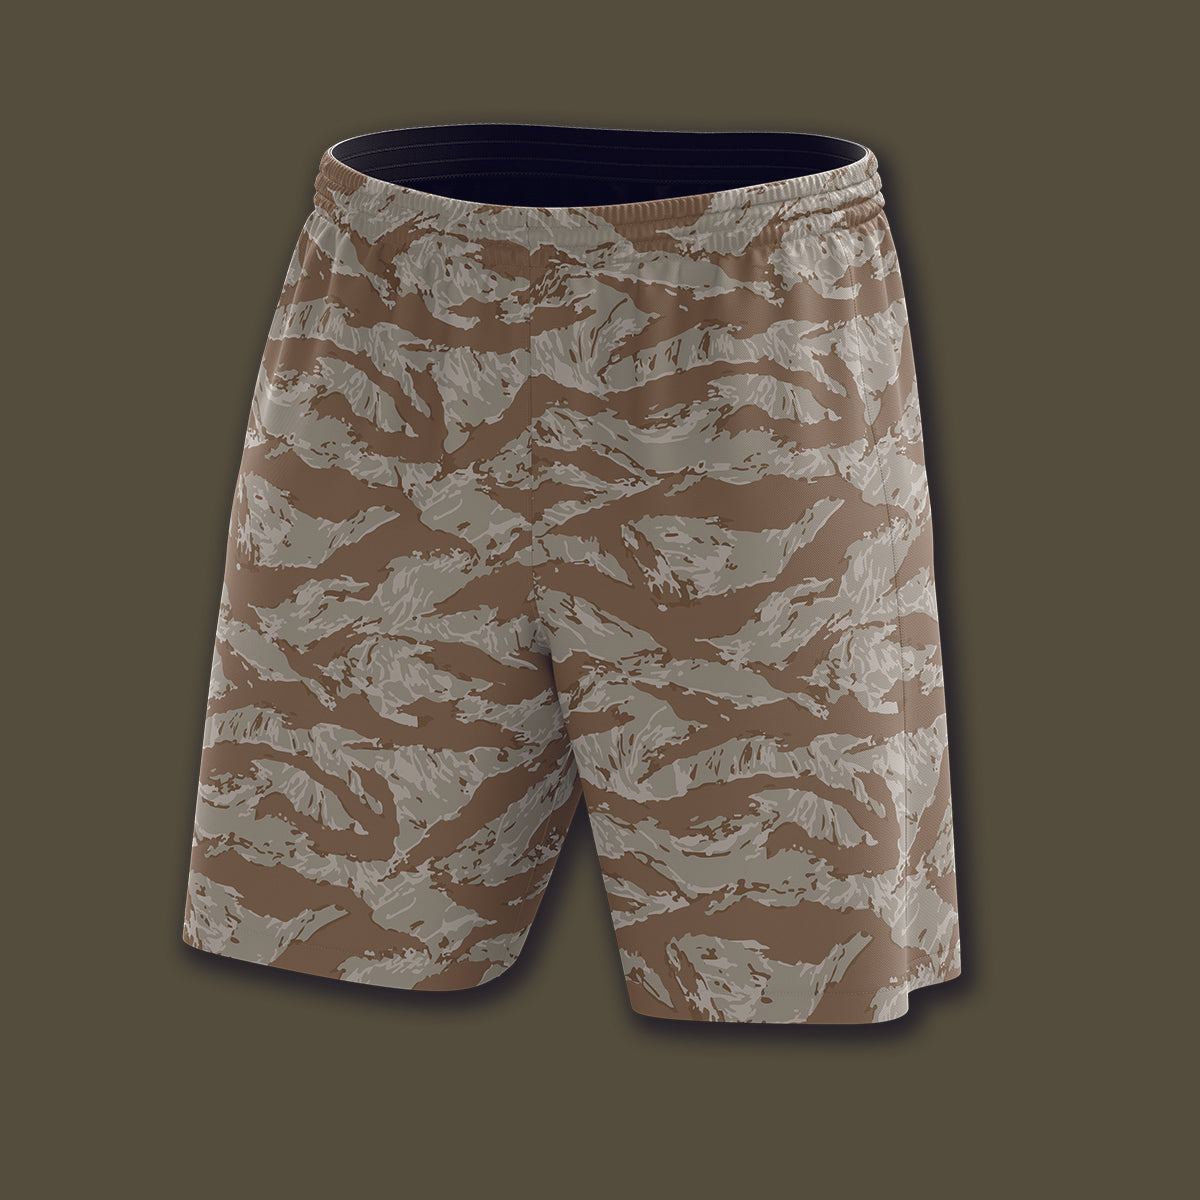 The ARID TIGER Weekend Shorts